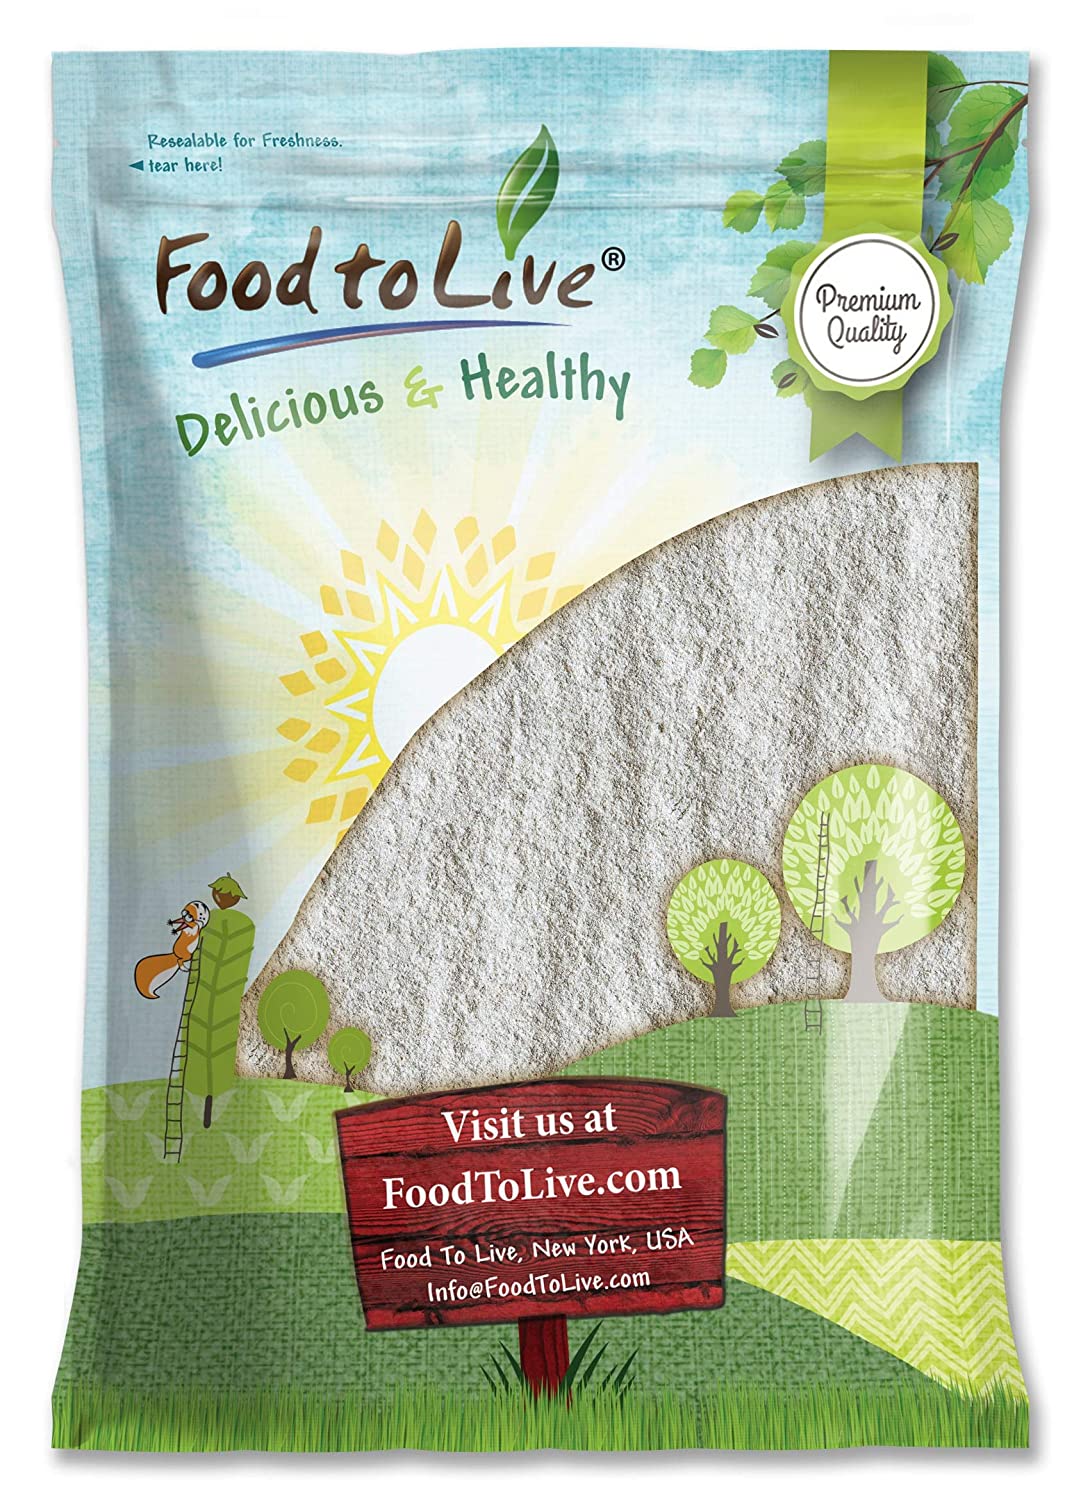 Rye Flour - Non-GMO Verified, Stone Ground from Whole Grain Rye Berries, Kosher, Vegan, Bulk, Great for Bread Baking, Product of the USA - by Food to Live